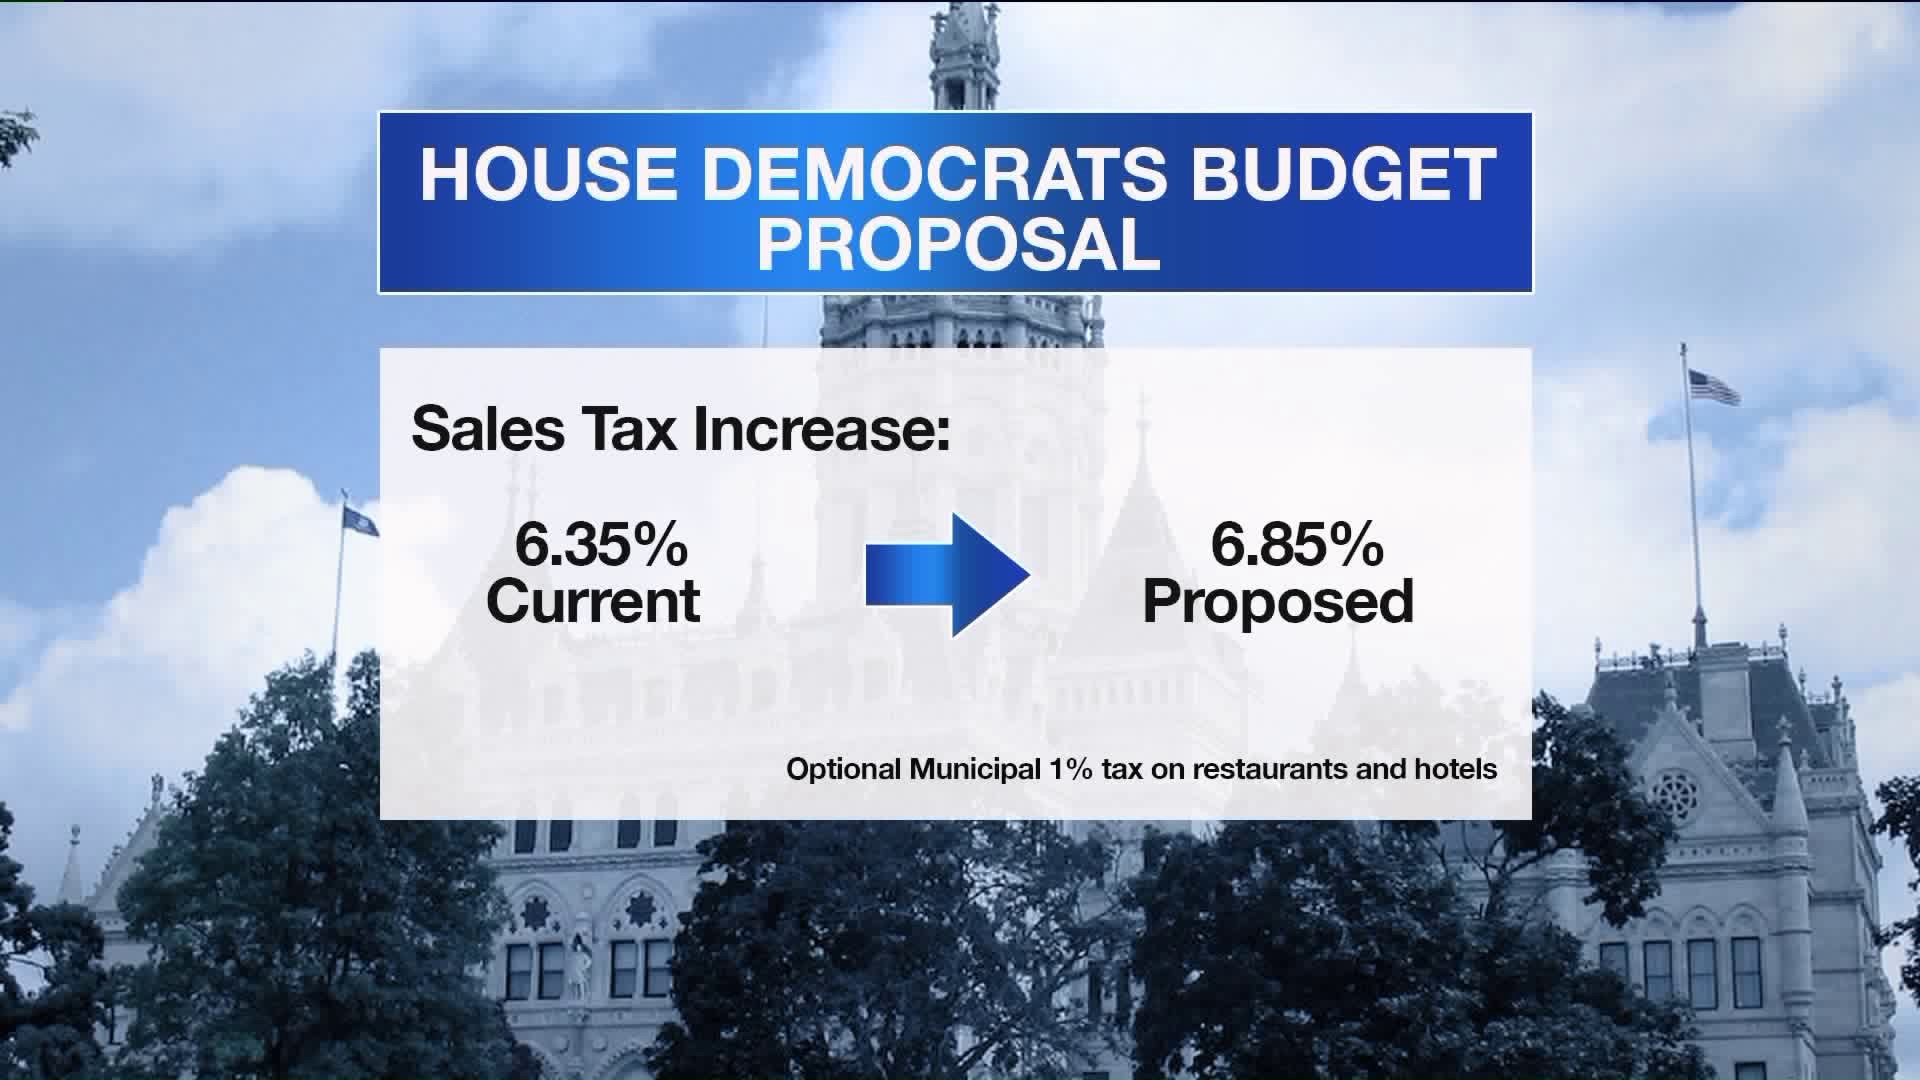 Sales tax increase proposed